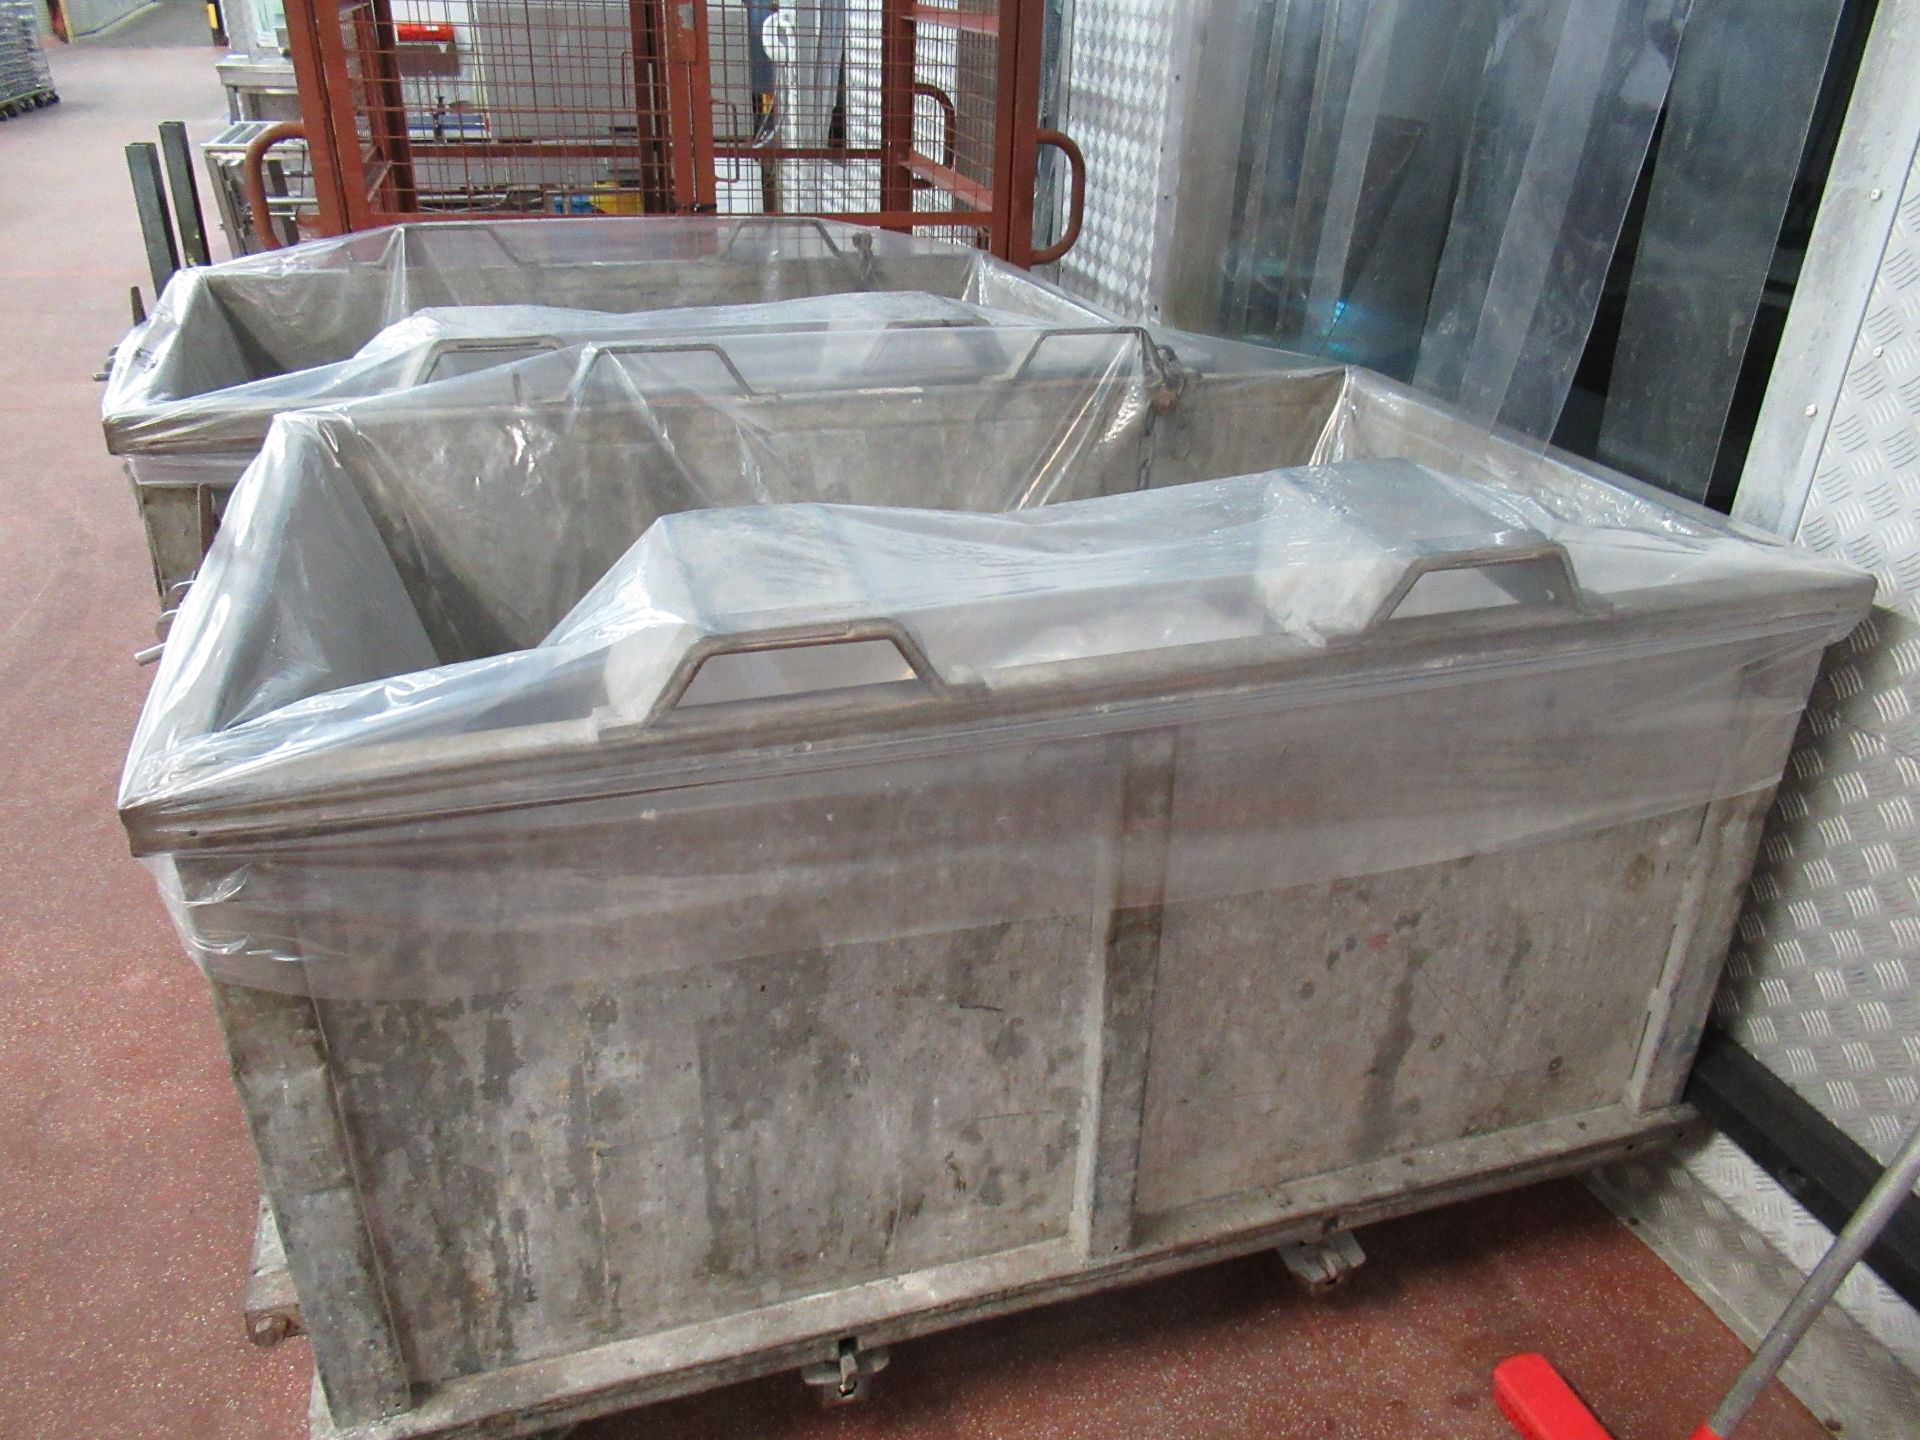 4 Galvanised mobile four wheel waste bins, 1600 x 950 x 750mm high with fold down draw bar - Image 8 of 9